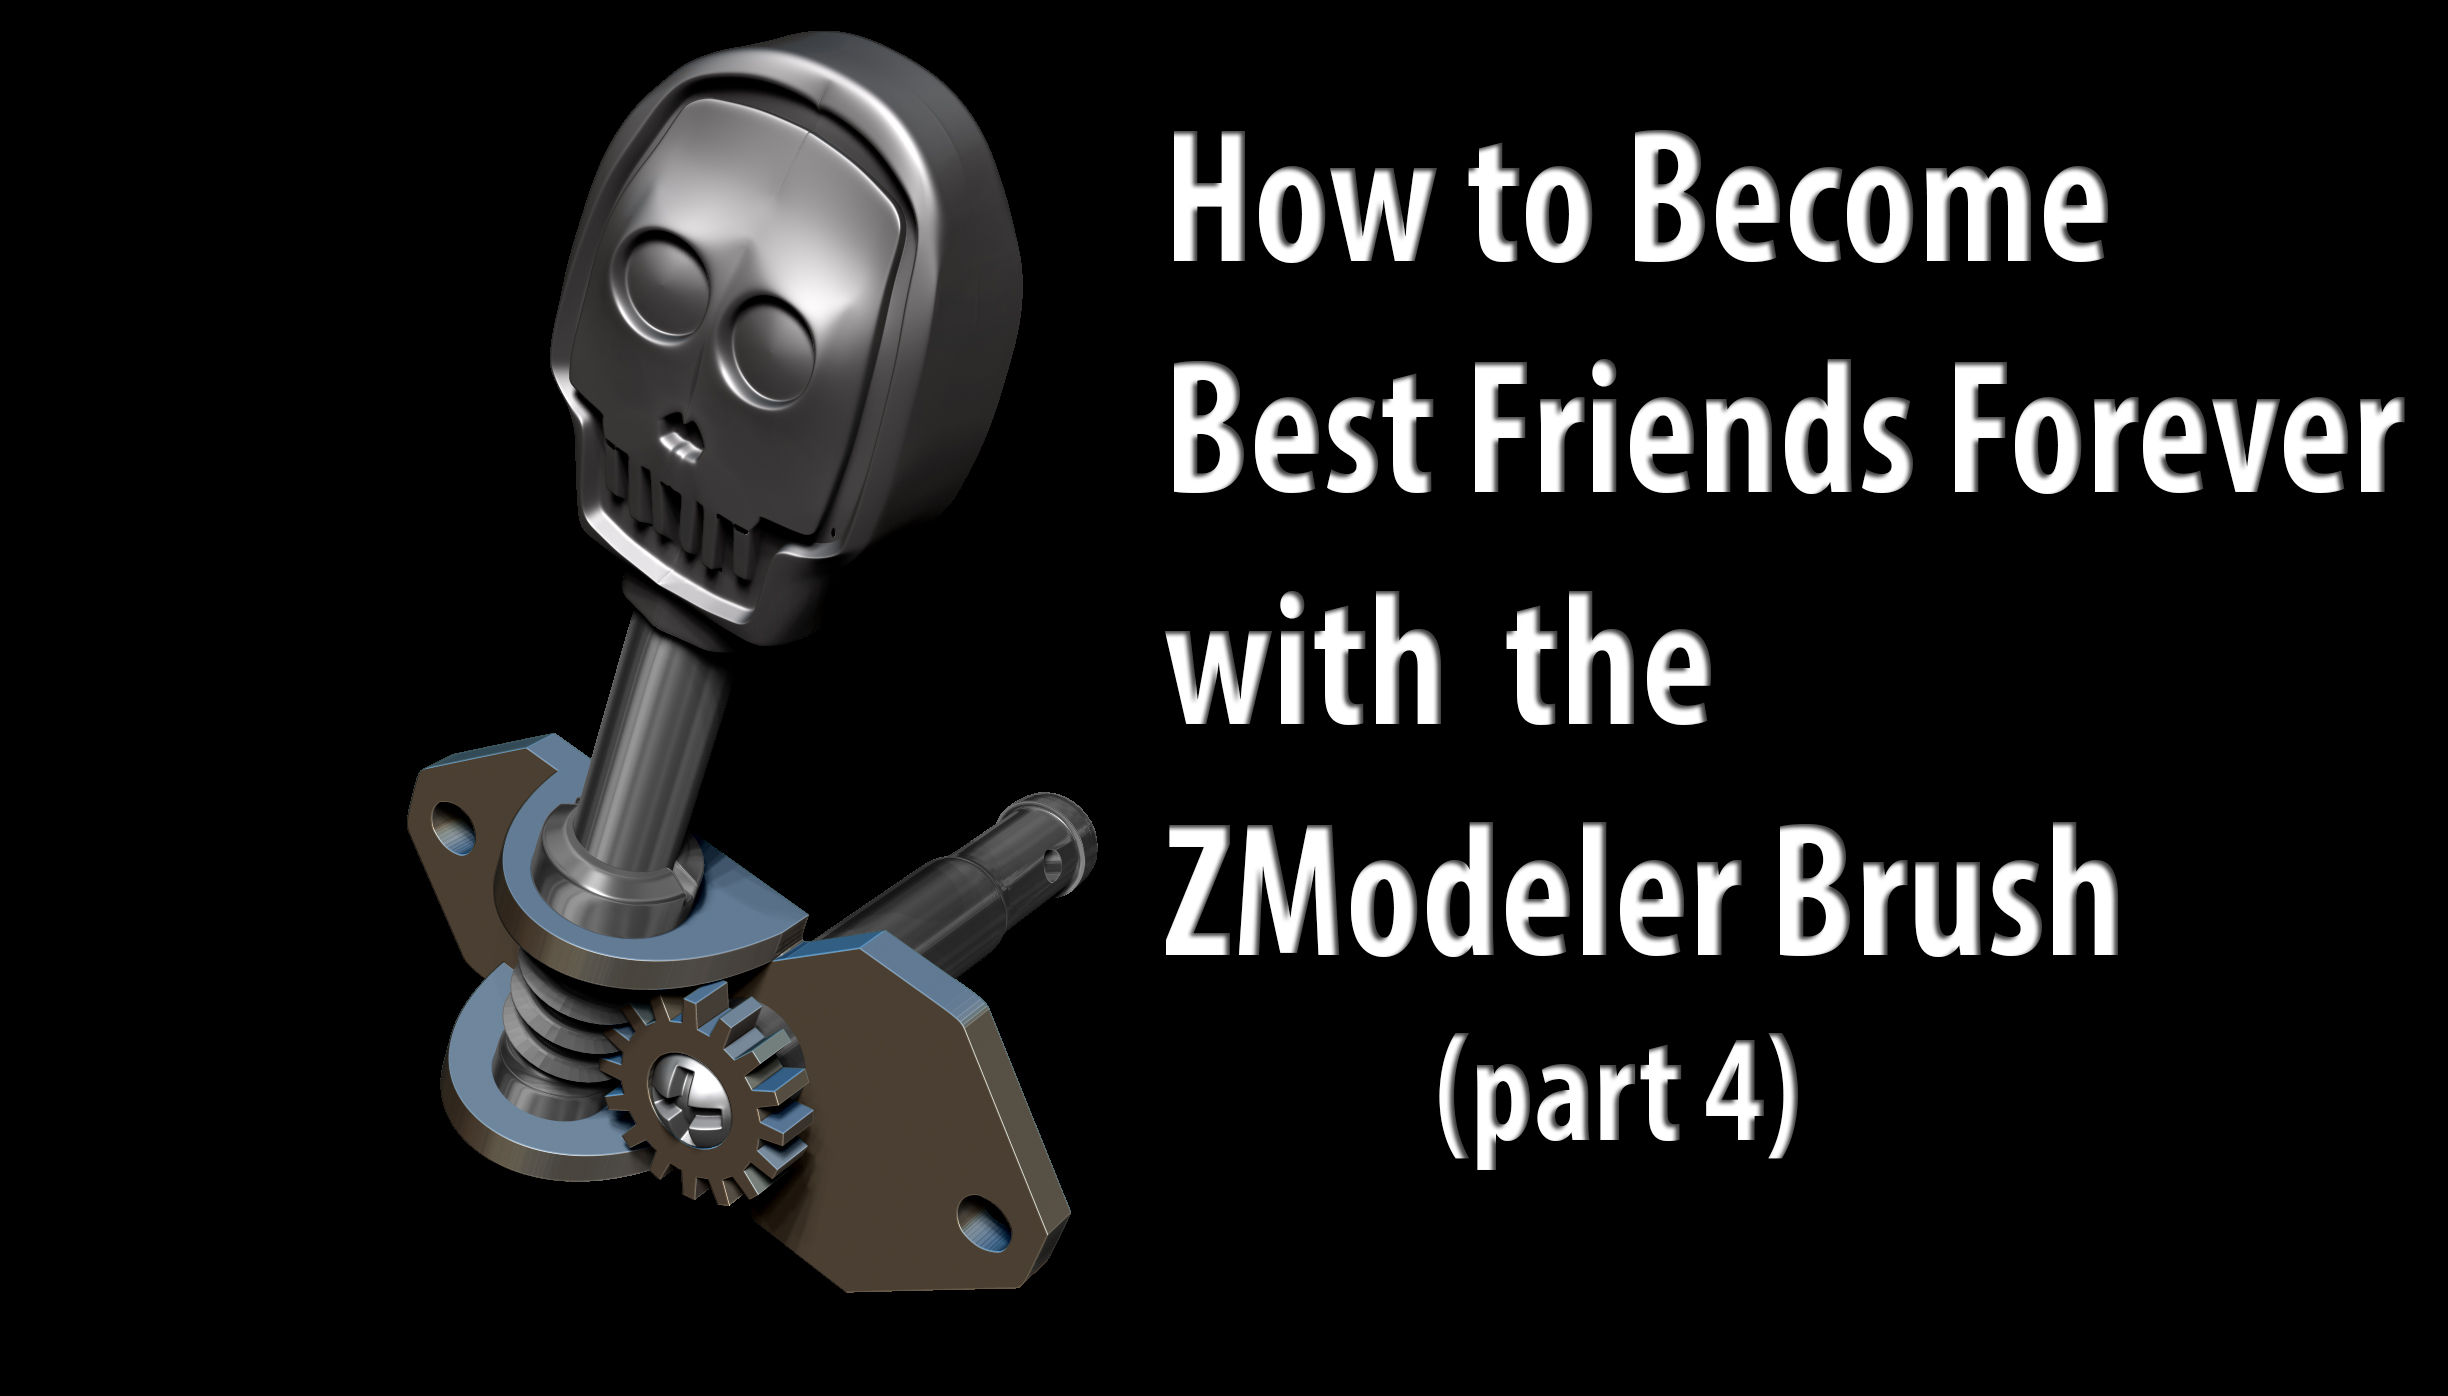 How-to-Become-Best-Friends-Forever-with-the-ZModeler-Brush-(part-4)sm.jpg